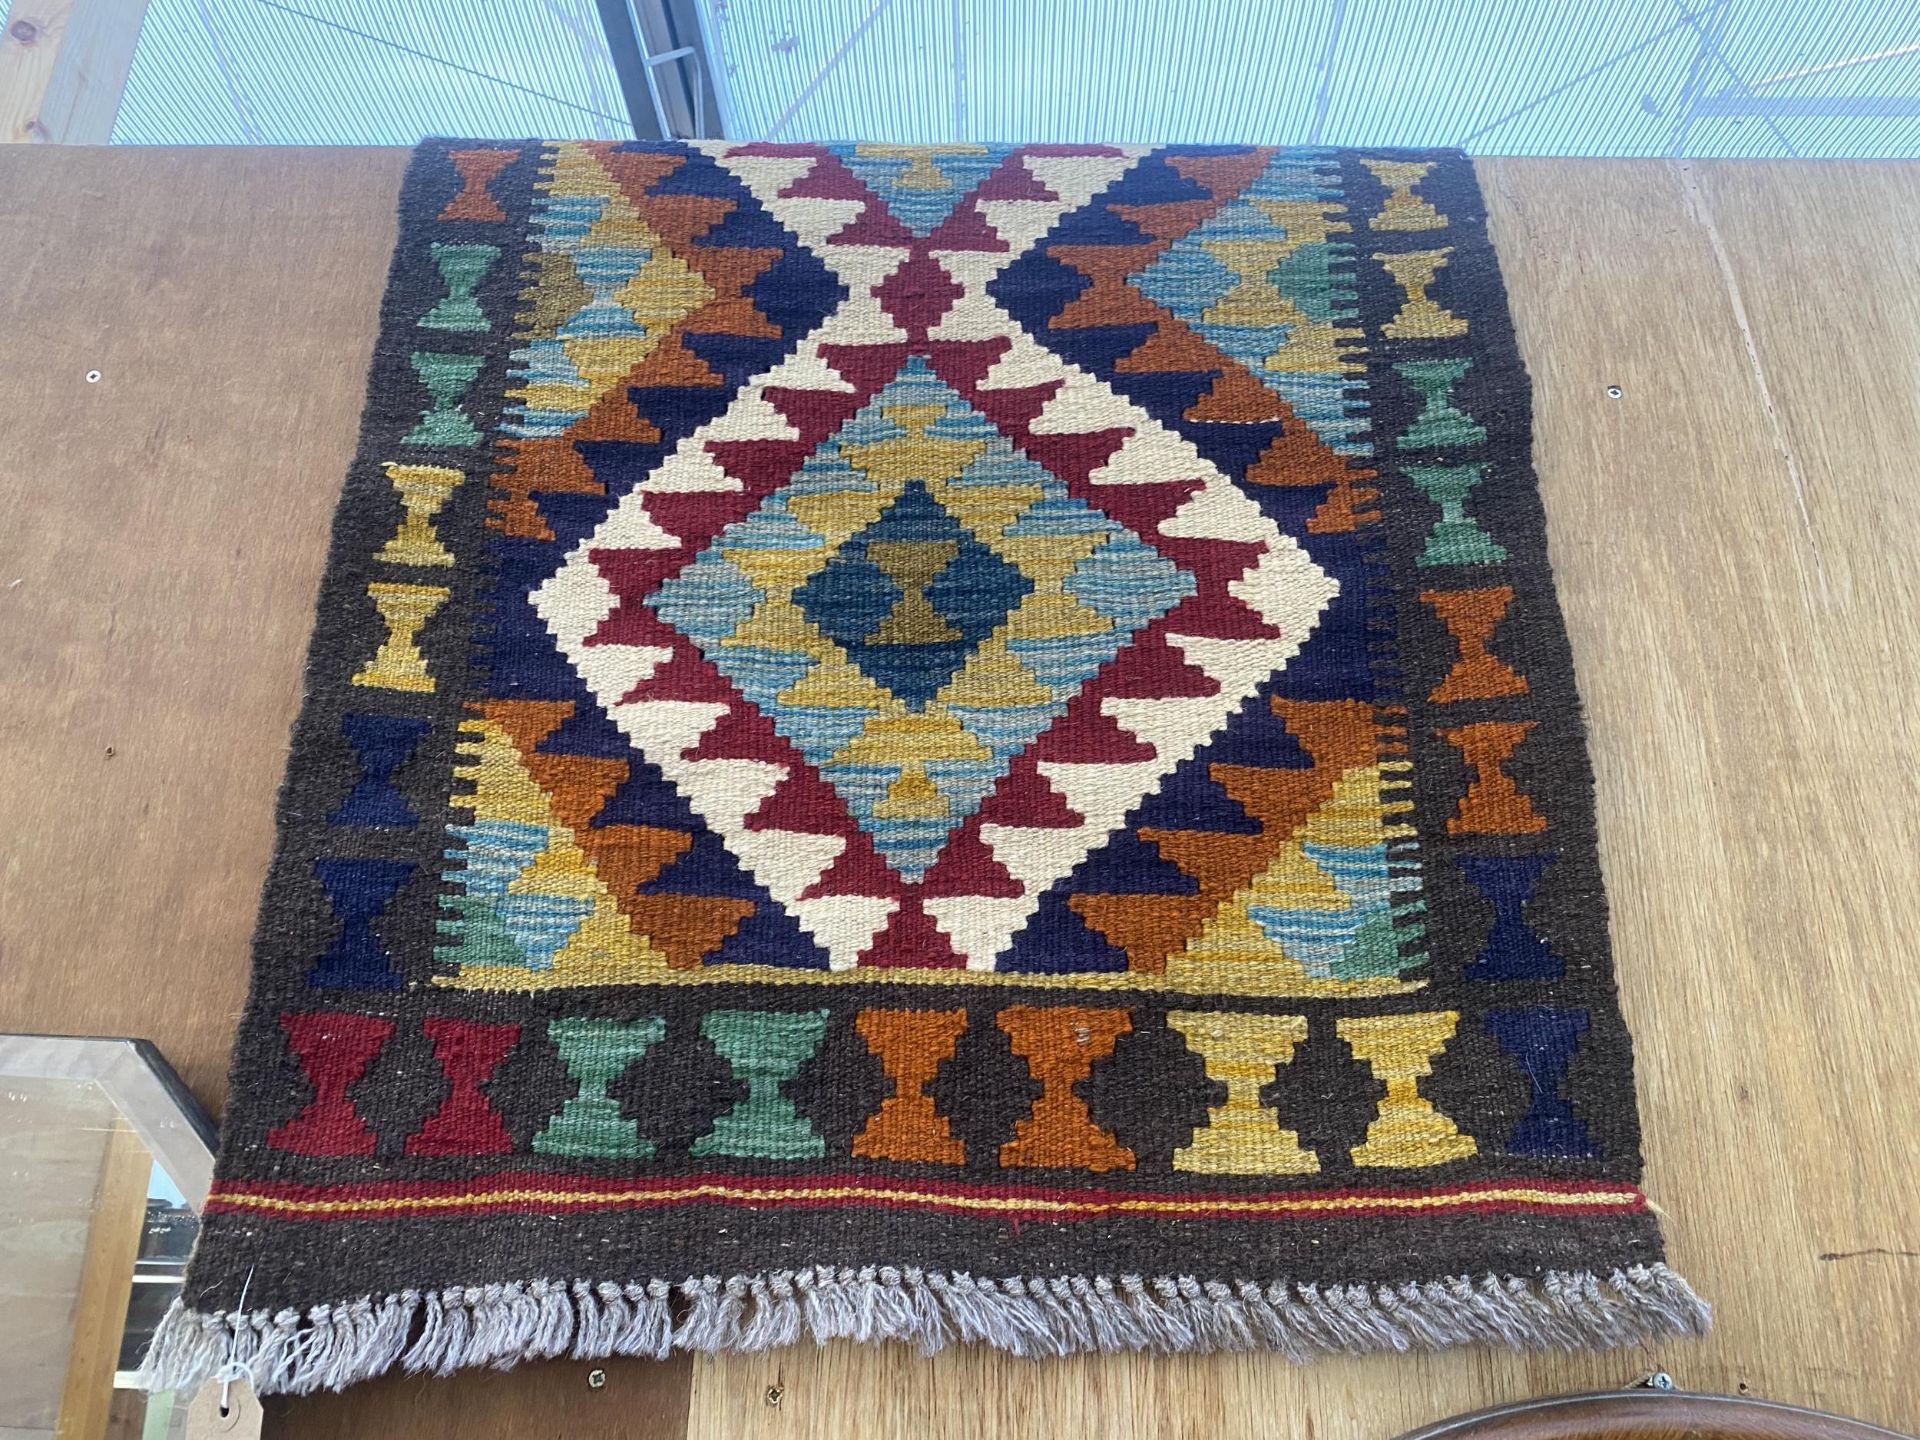 A SMALL PATERNED FRINGED RUG